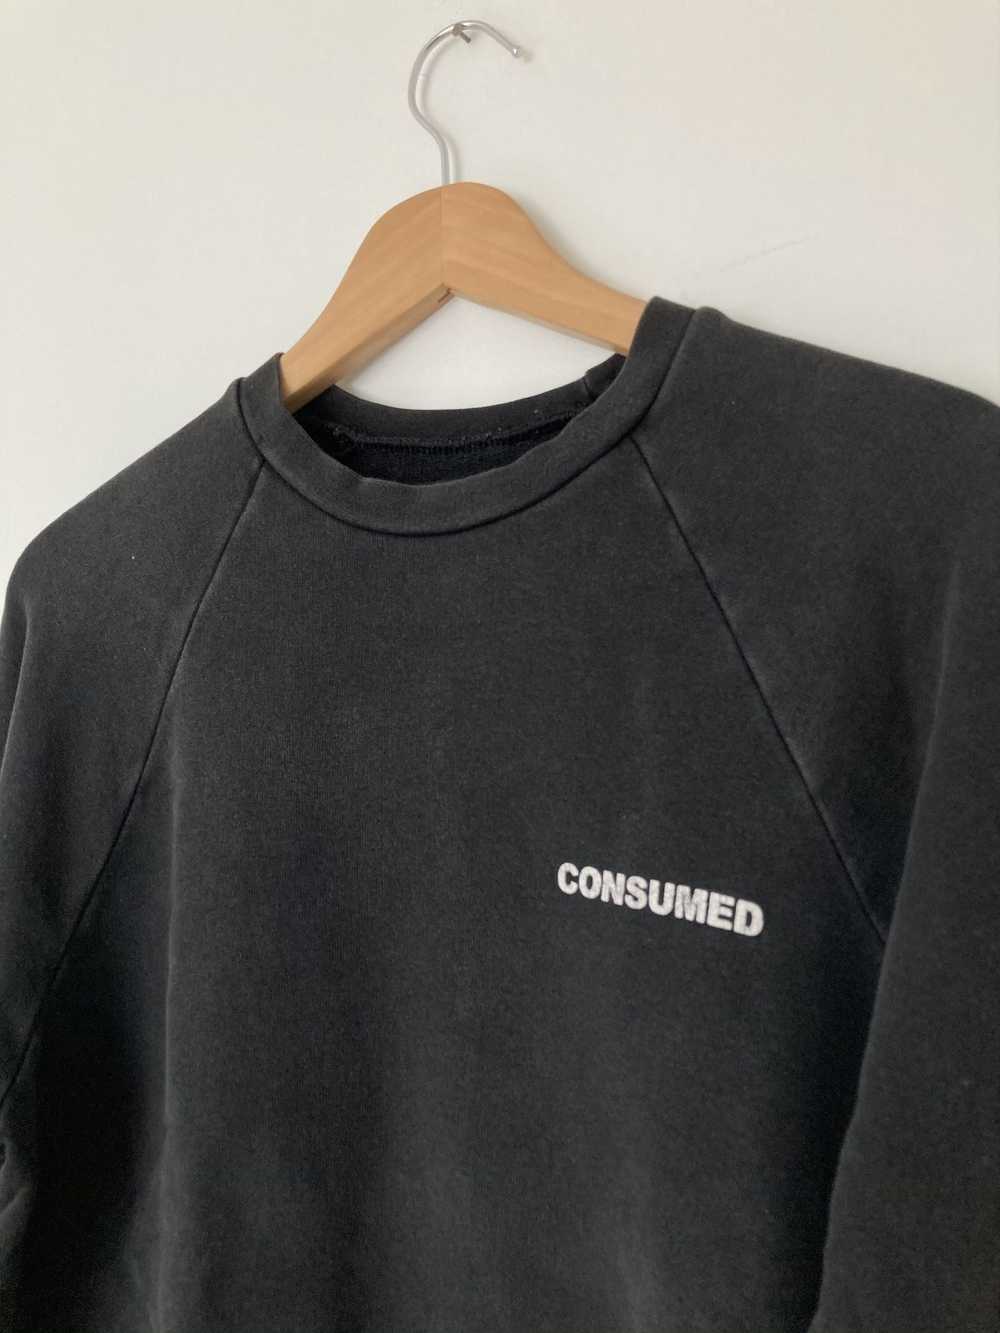 Raf Simons Raf SS03 Consumed "Commodity" sweater - image 3